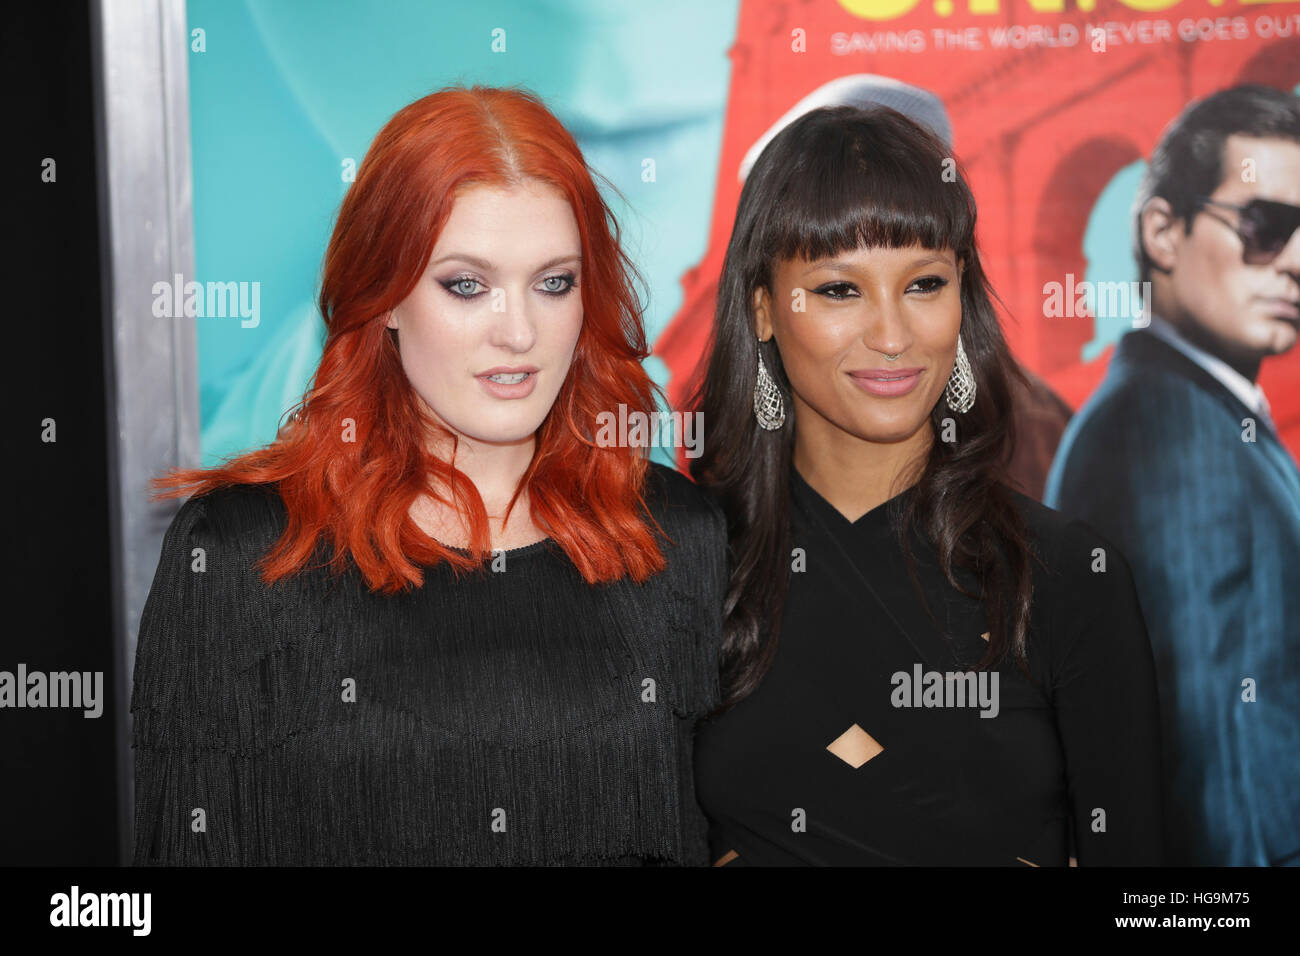 Icona Pop (Aino Jawo and Caroline Hjelt) arrive at The Man From U.N.C.L.E premiere at the Zigfield Theater in NYC. Stock Photo